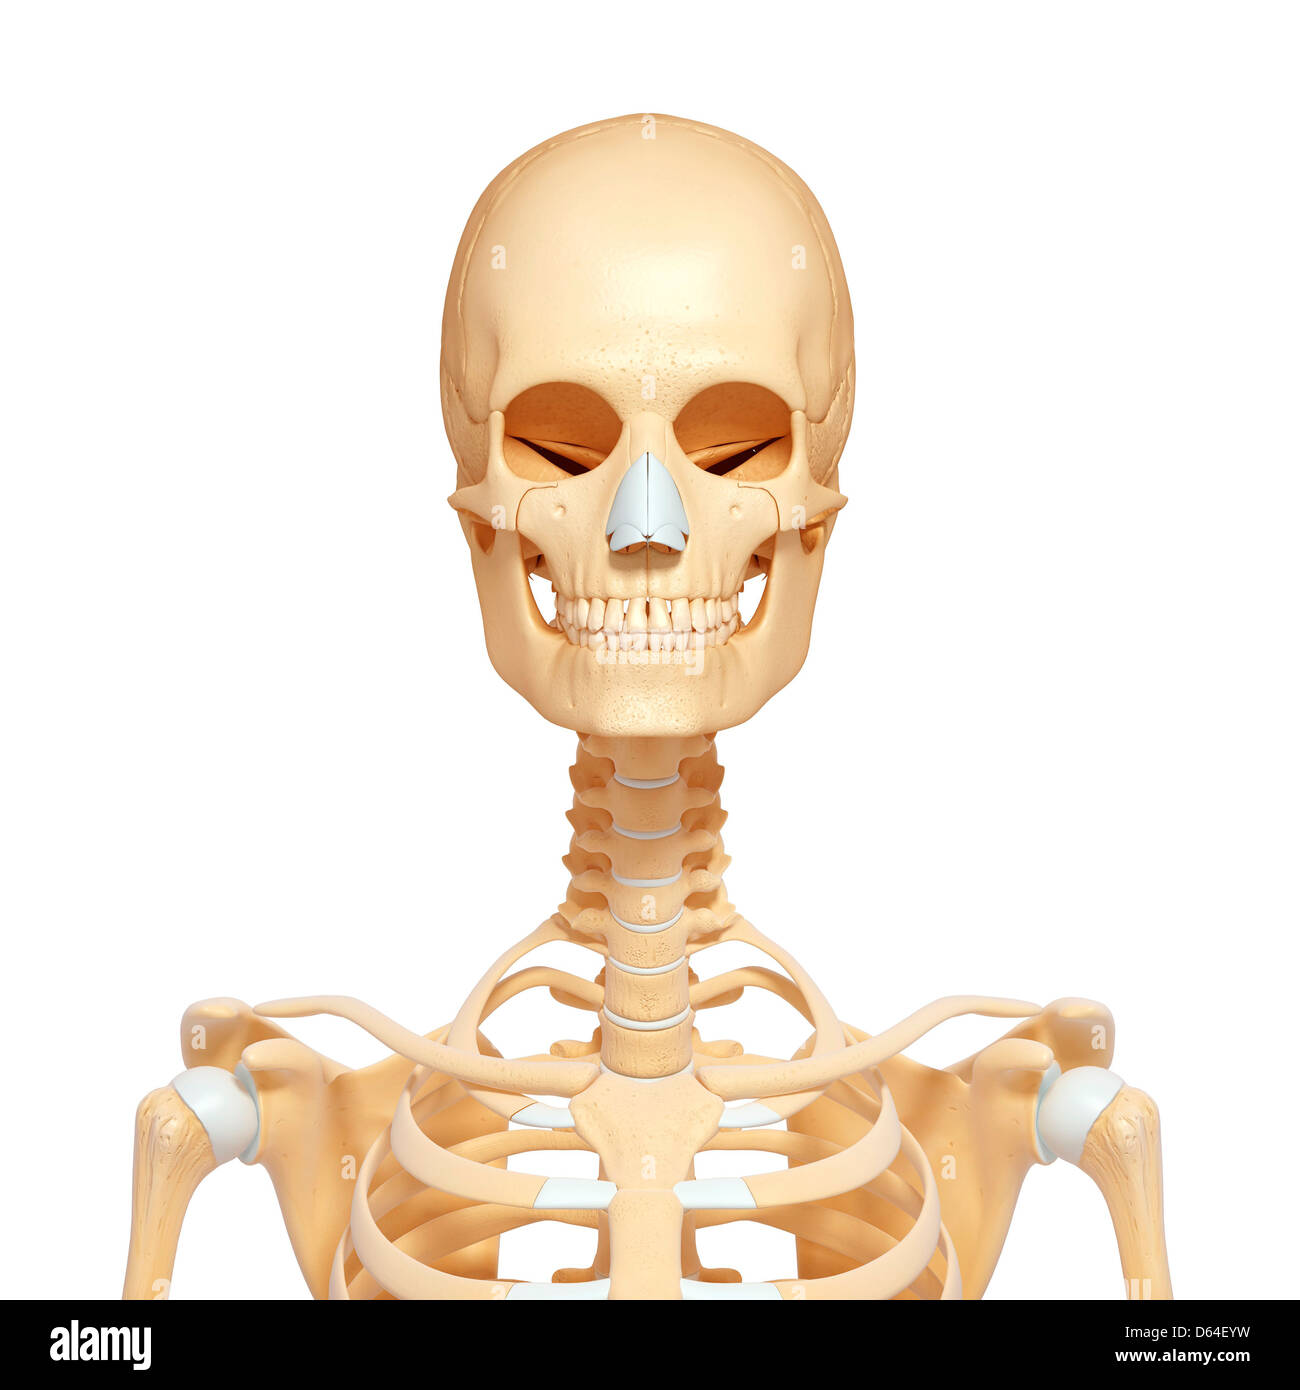 Clavicle bone or collarbone close-up with body 3D rendering illustration  isolated on white with copy space. Human skeleton and shoulder girdle  anatomy, medical diagram, skeletal system concepts. Stock Illustration